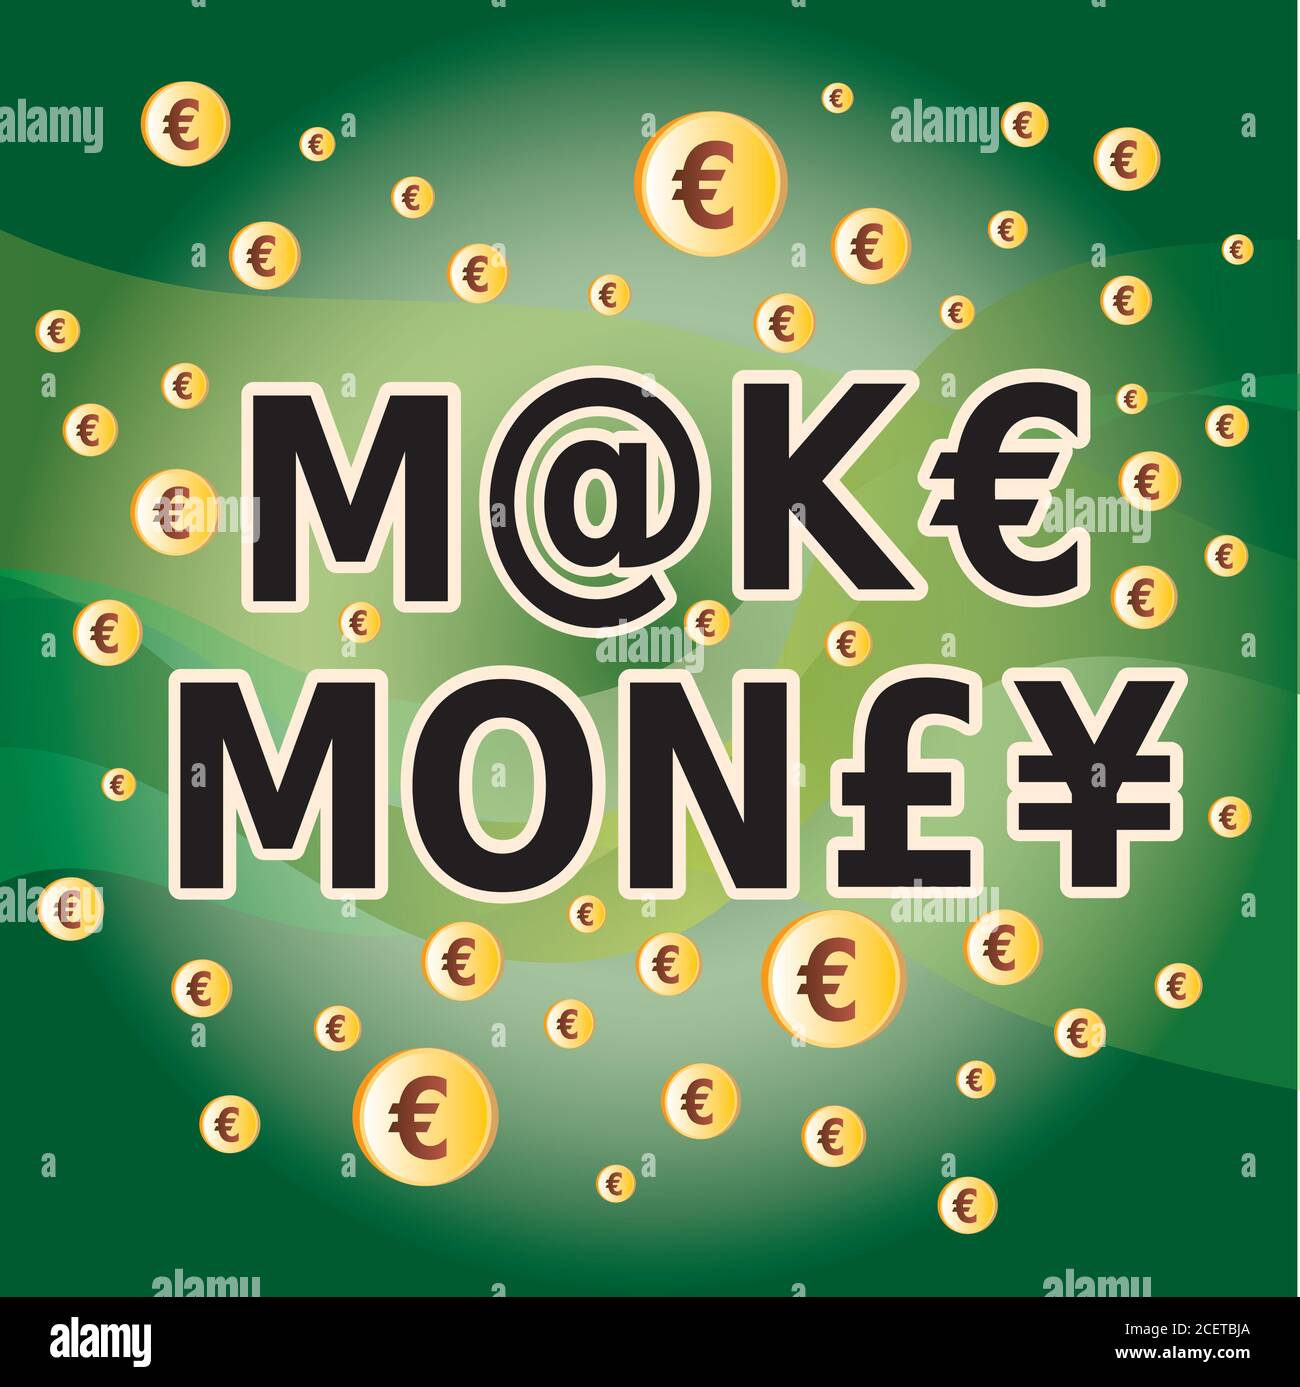 Make Money Quote - Letter and Money Currency Symbols in Green and Gold Colors Stock Vector